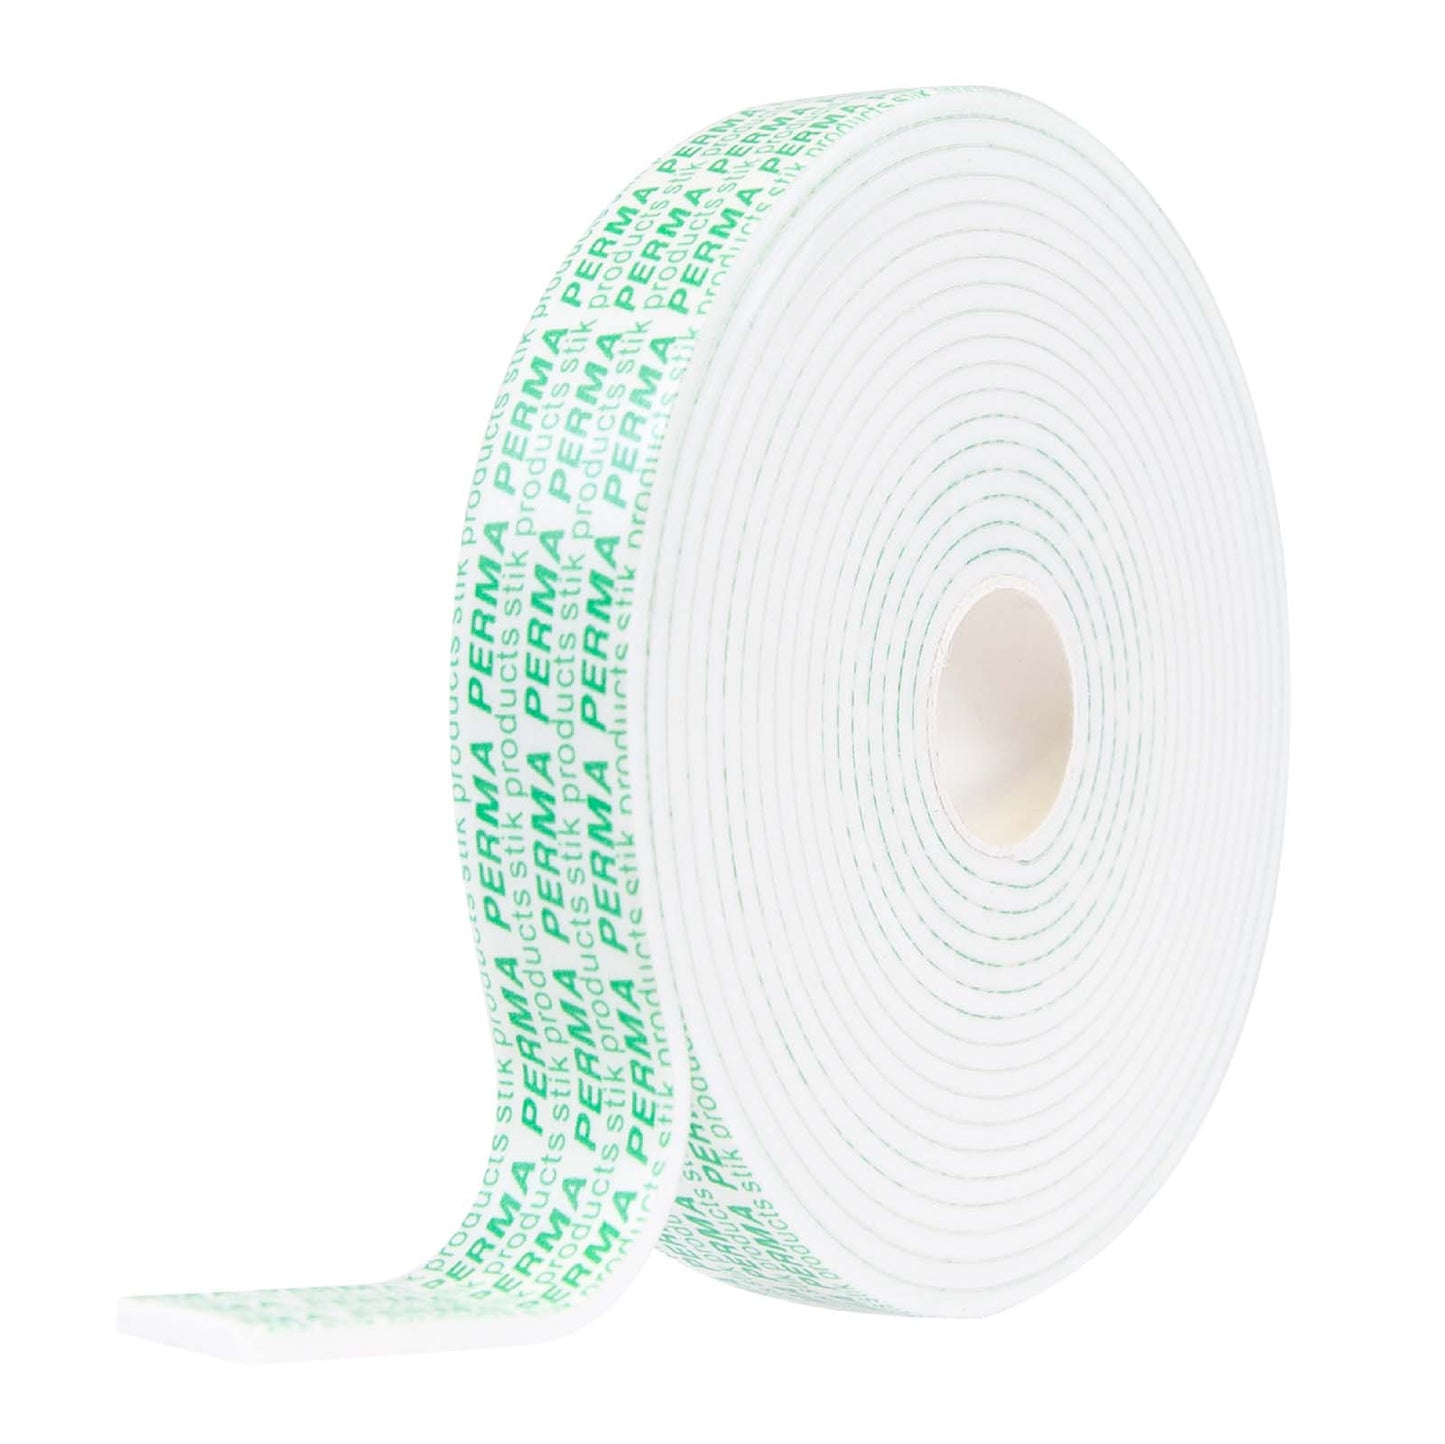 Mirror Mounting Tape - 16.4' x 0.94" Roll